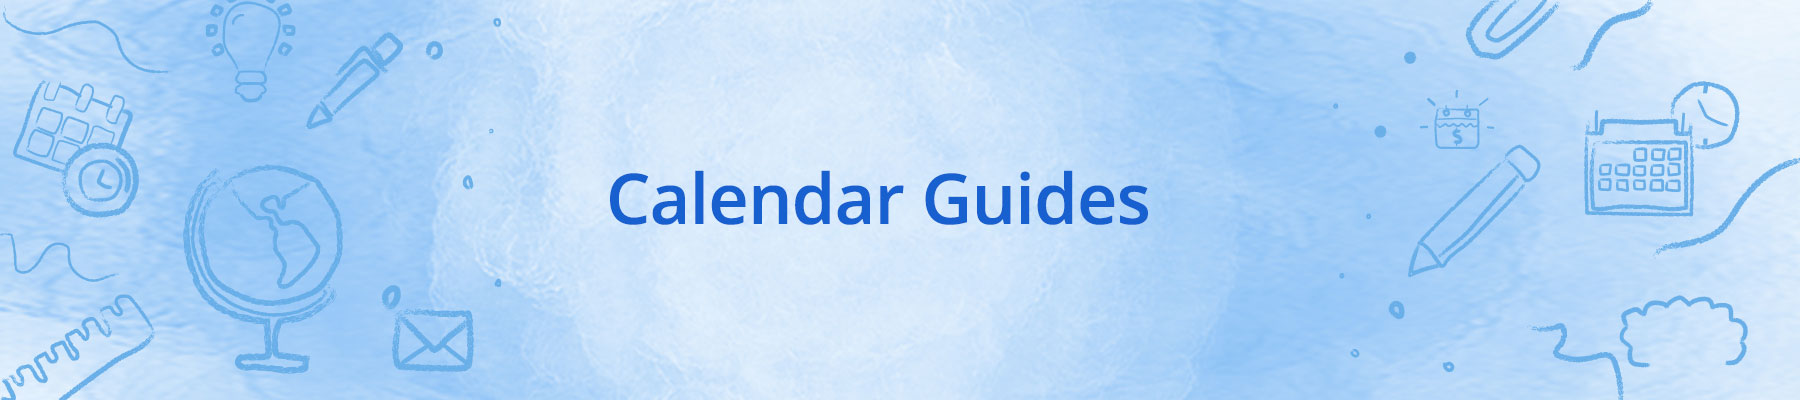 Productivity Guides for Small Business Owners Calendar